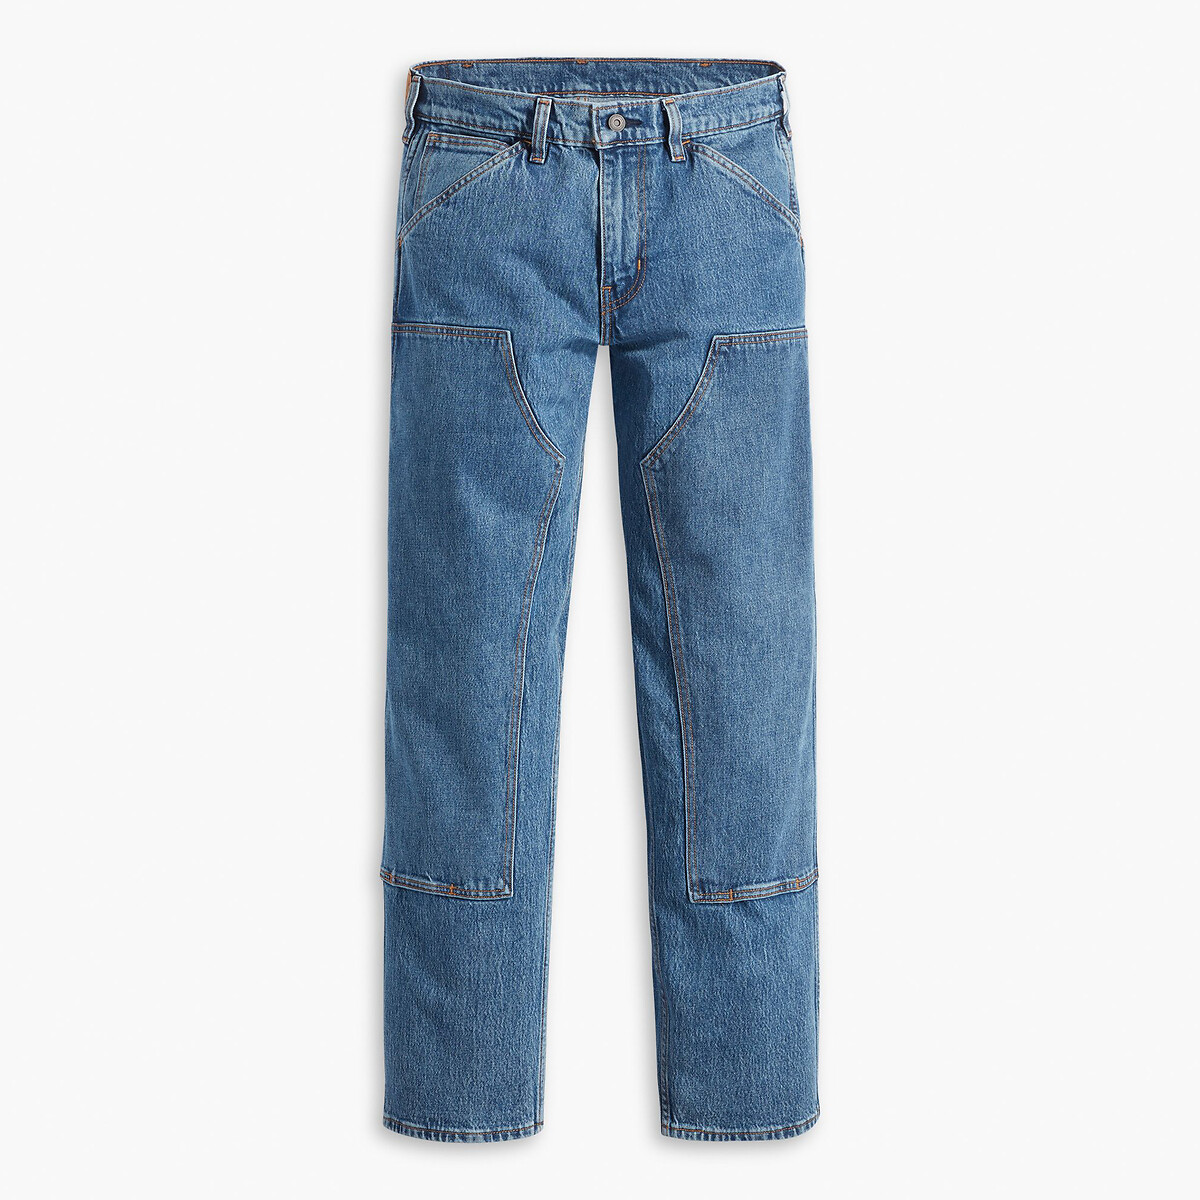 Workwear Carpenter Jeans in Mid Rise